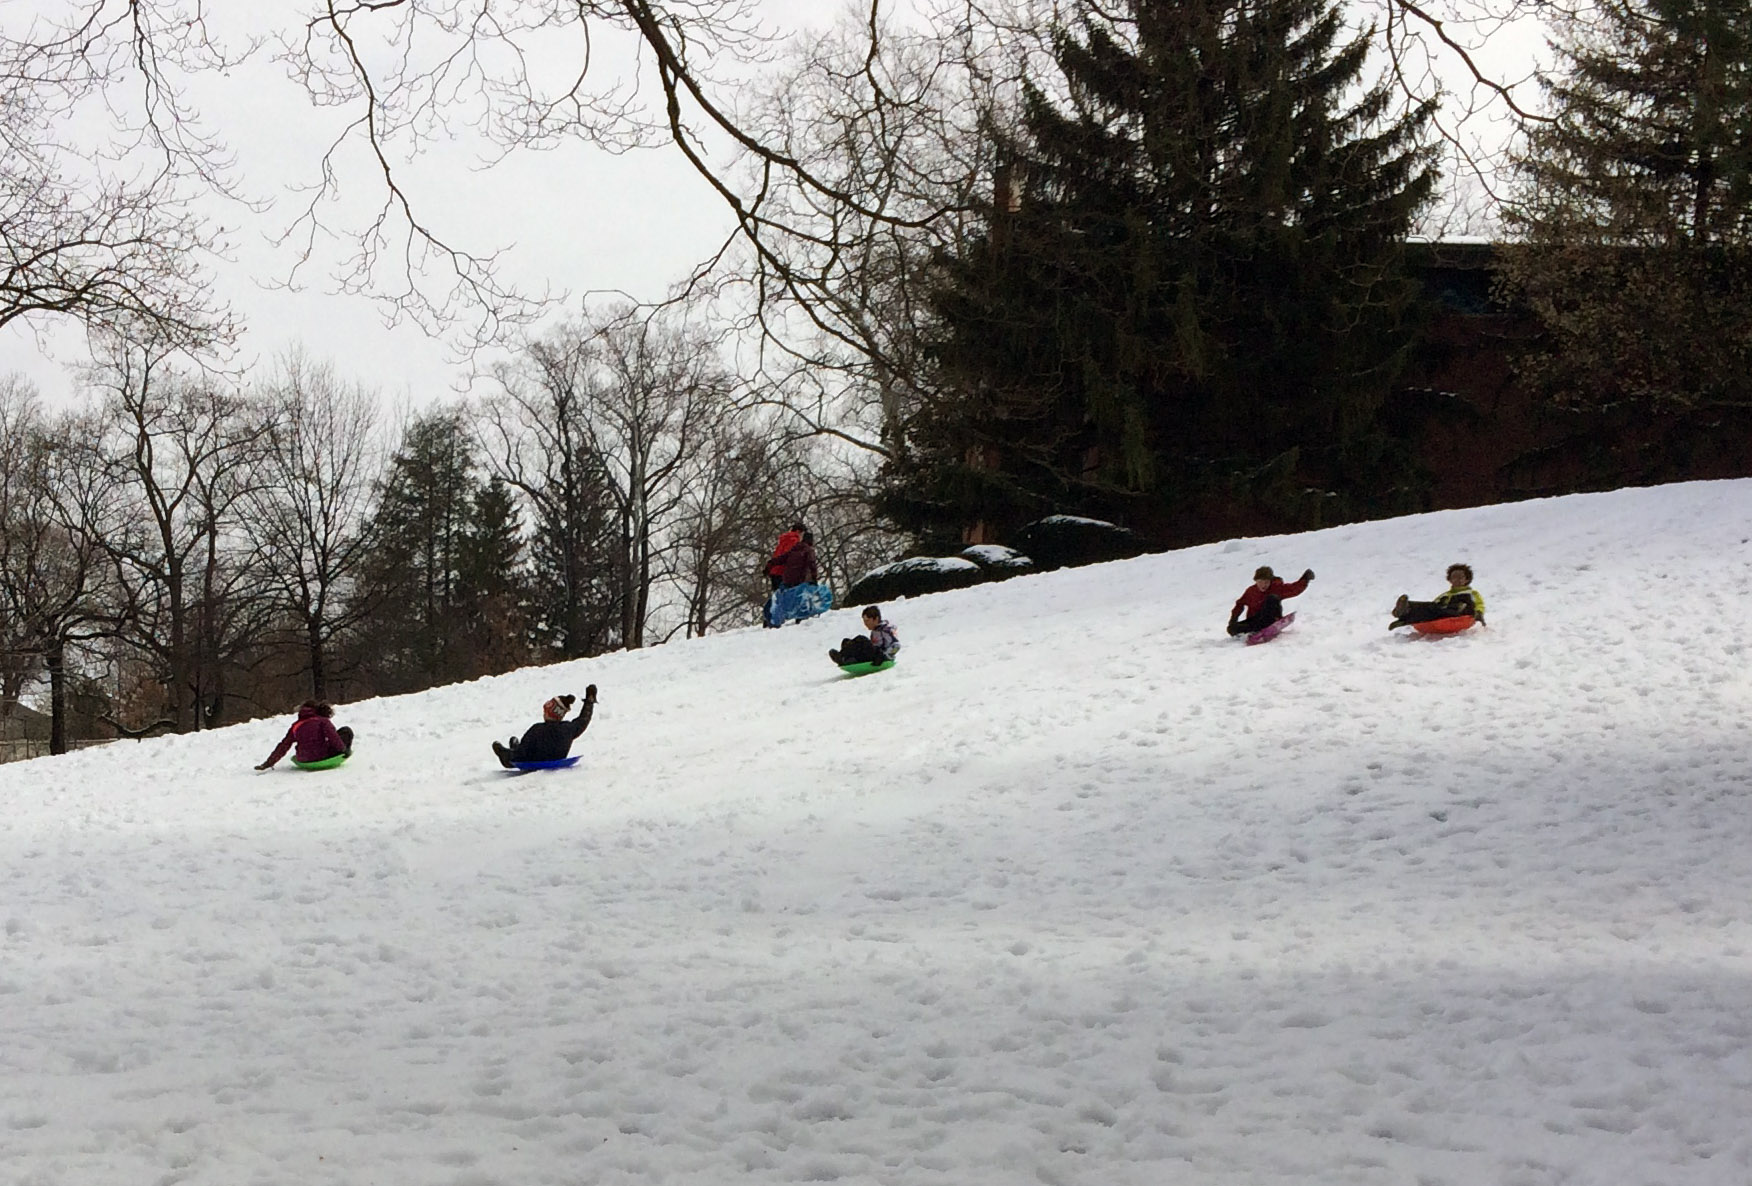 Children sled down a hill at Wesley Theological Seminary off Massachusetts Avenue in D.C. on Tuesday, March 14, 2017. (WTOP/Dick Uliano)